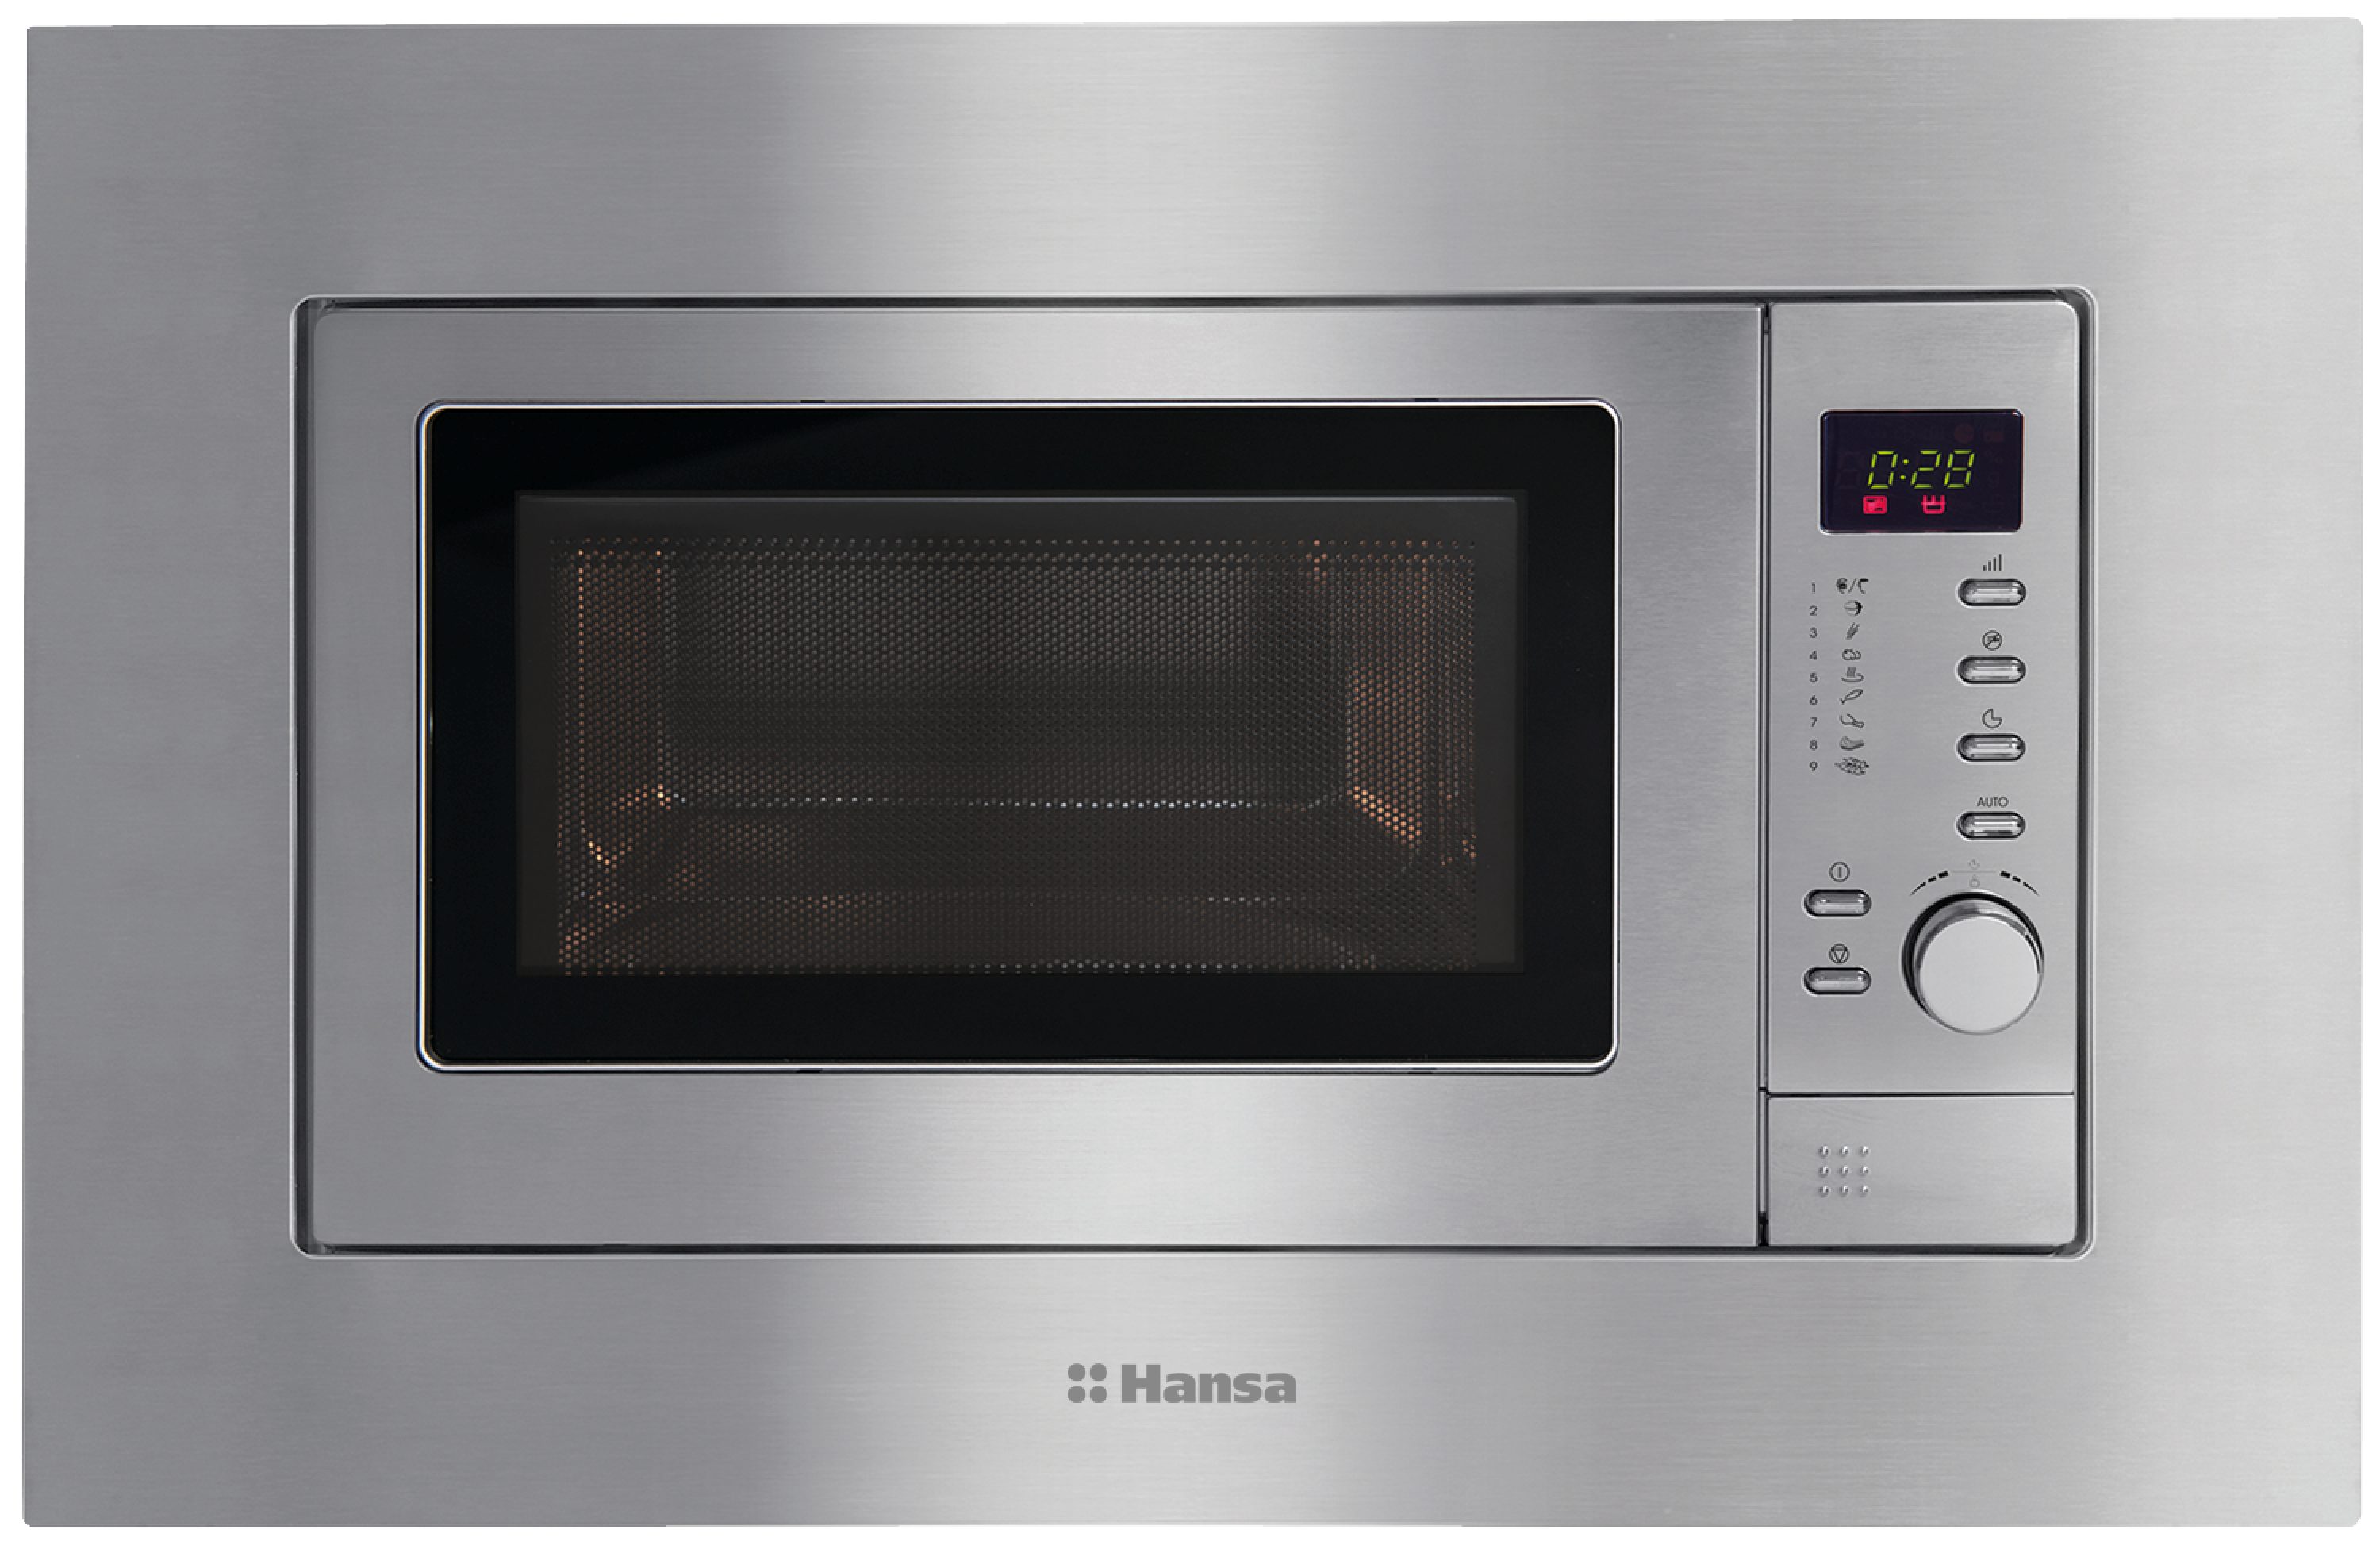 Built-in microwave oven